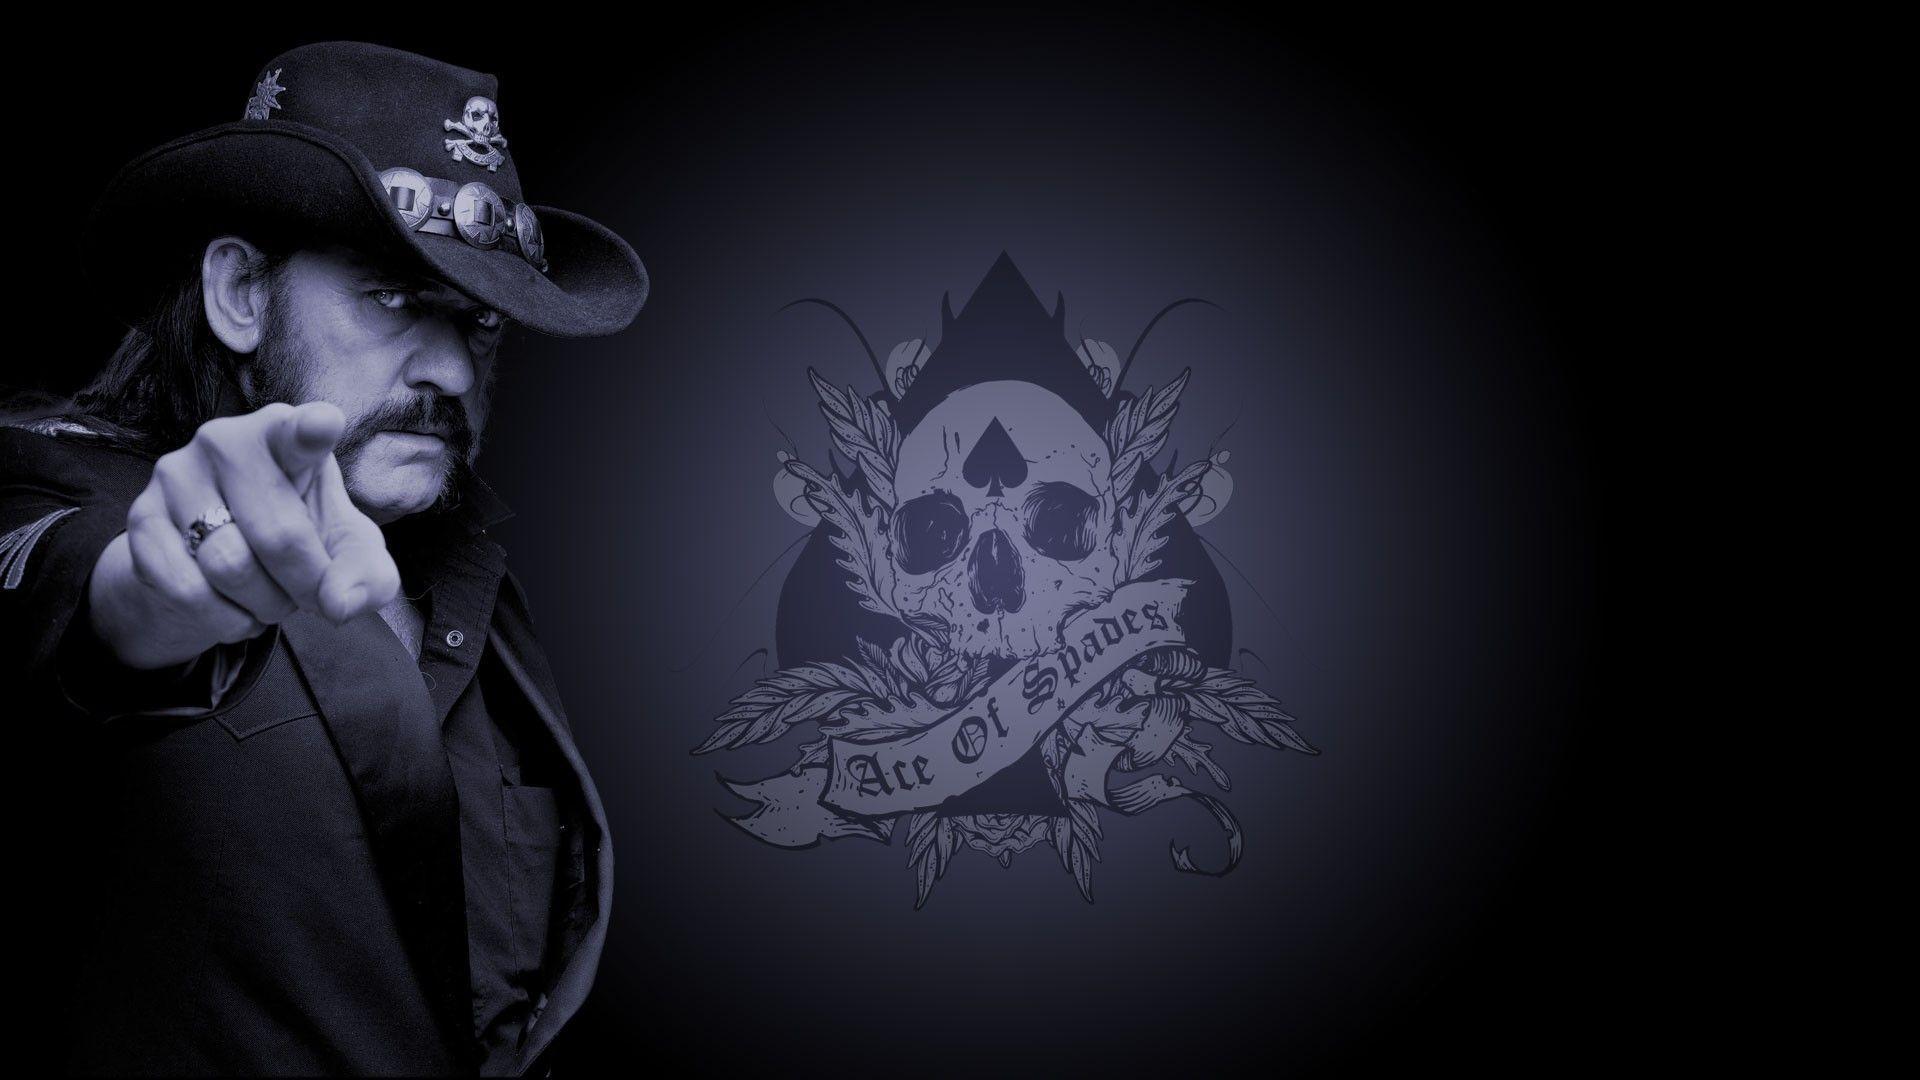 Ace of Spades HD Wallpaper. Background Imagex1080